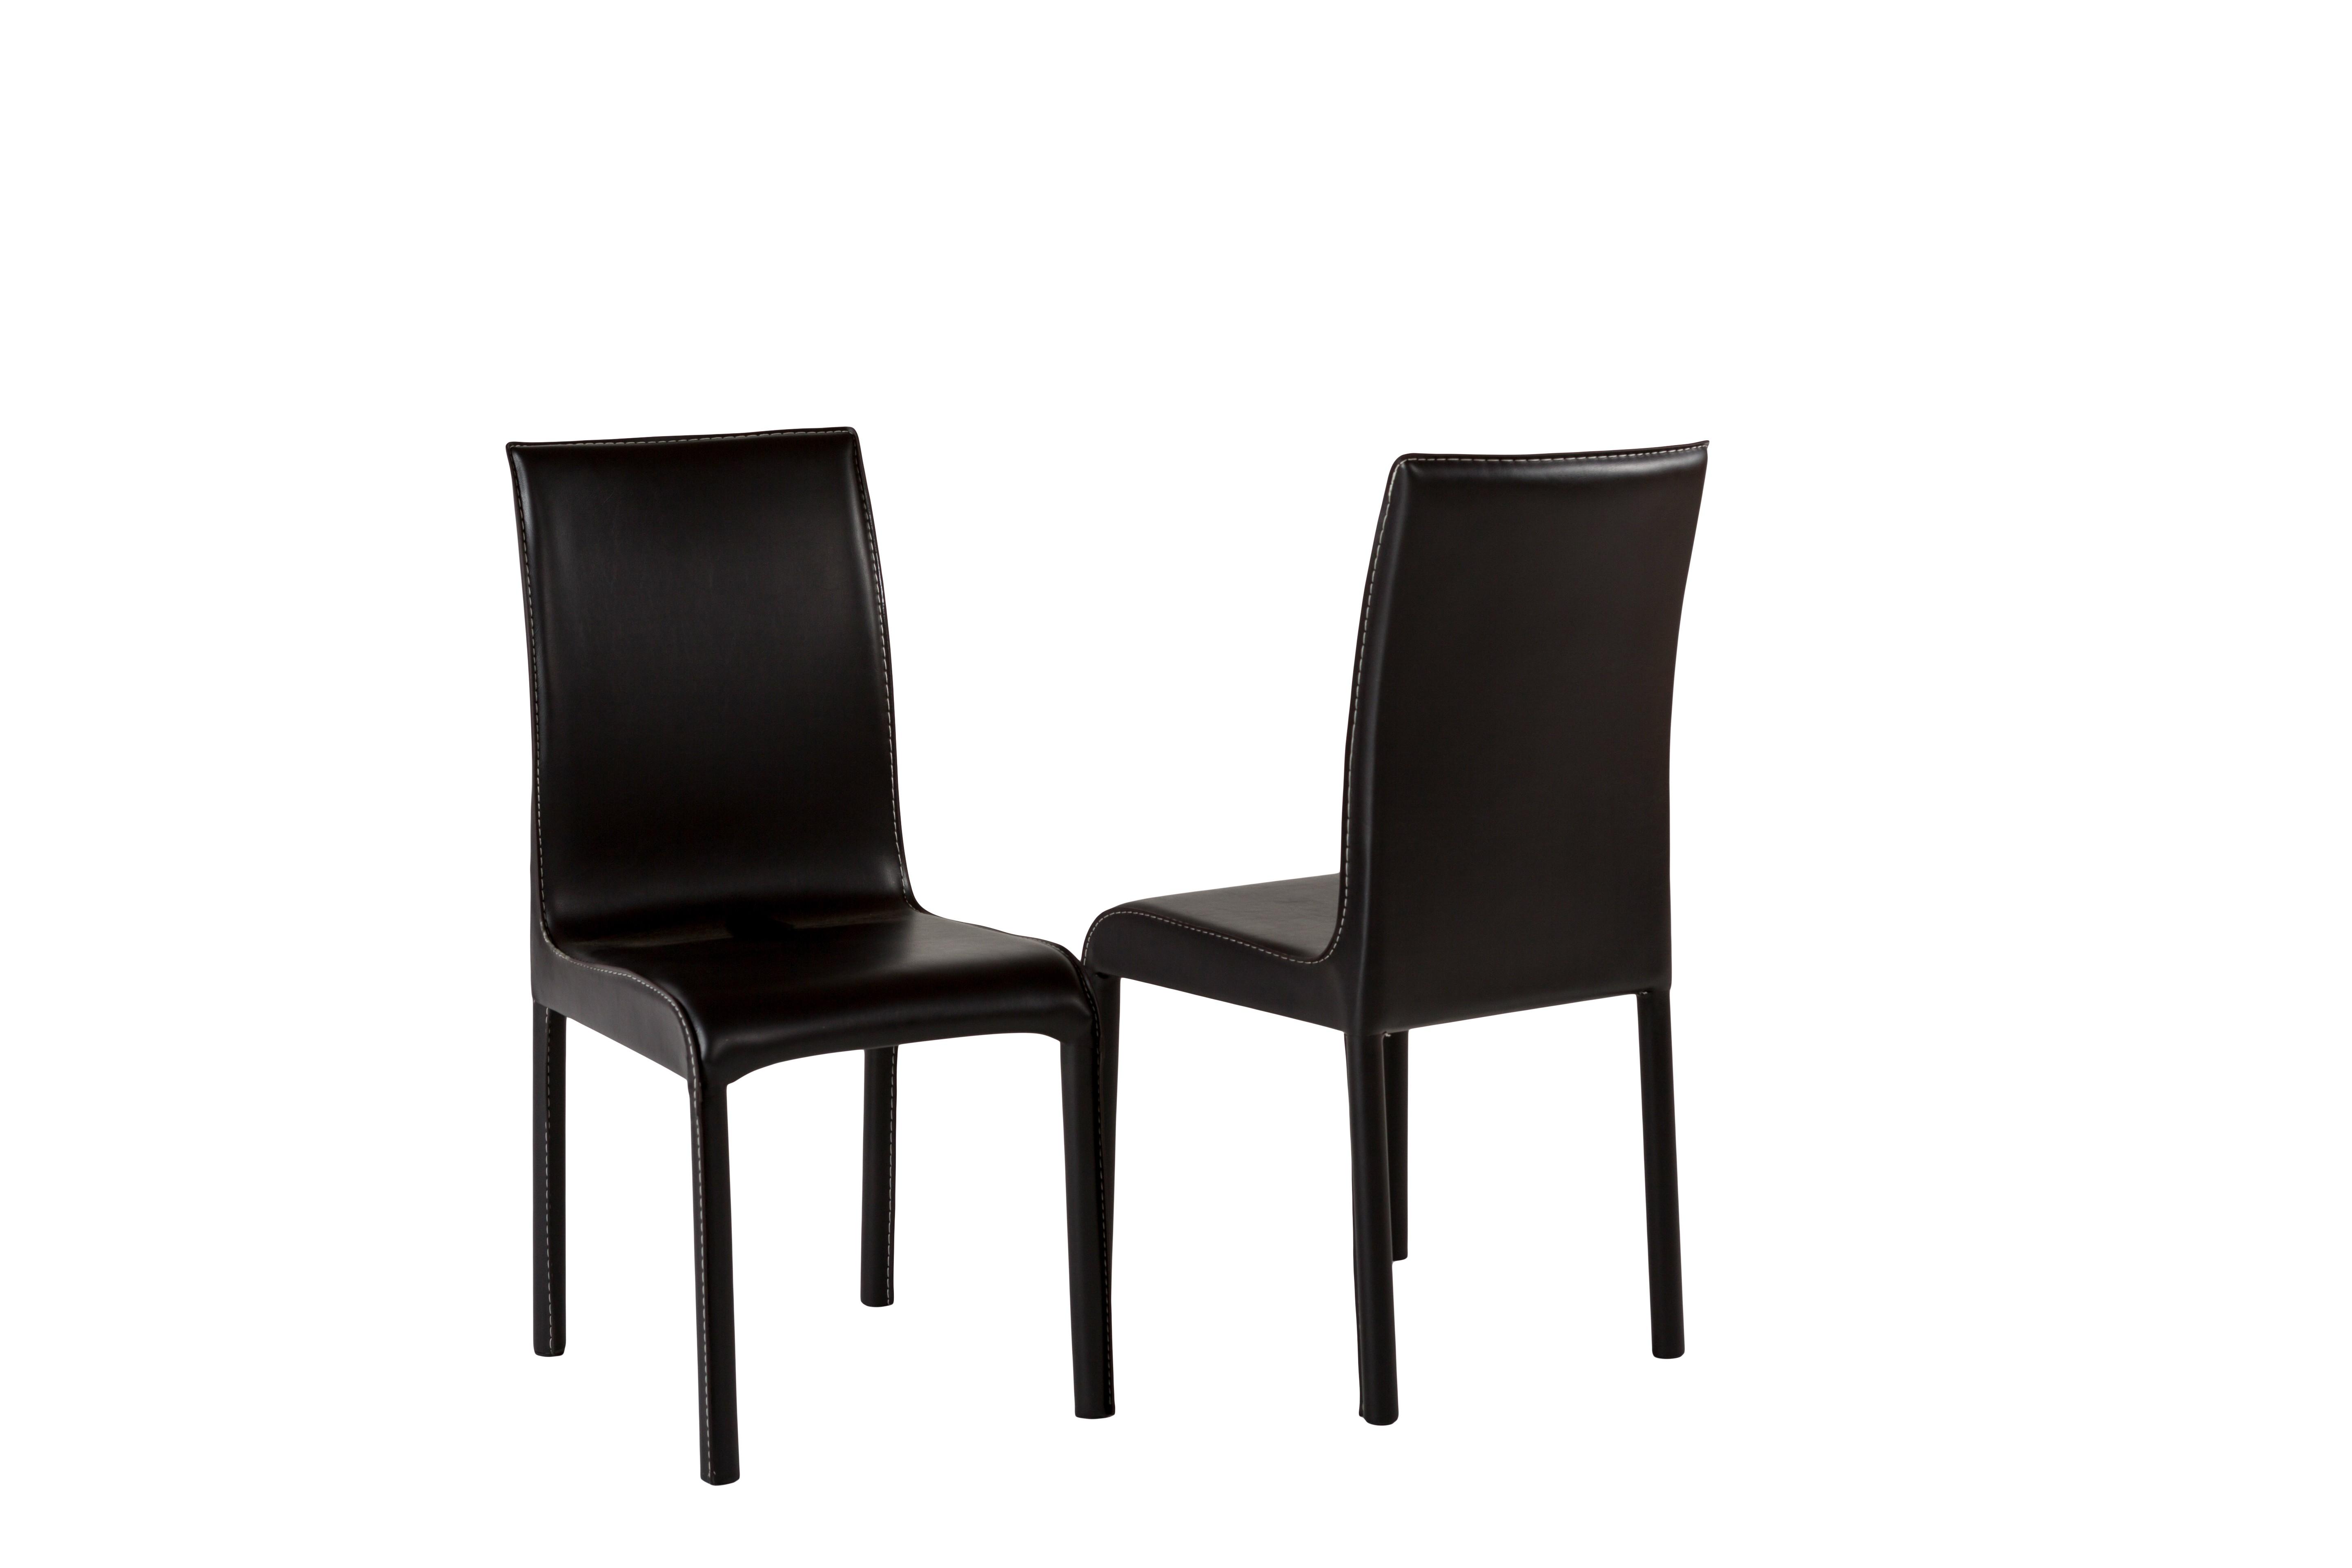 Contemporary Dining Side Chair Swansea SKUDC201029-DC8088-BROWN-Set-6 in Brown Leather